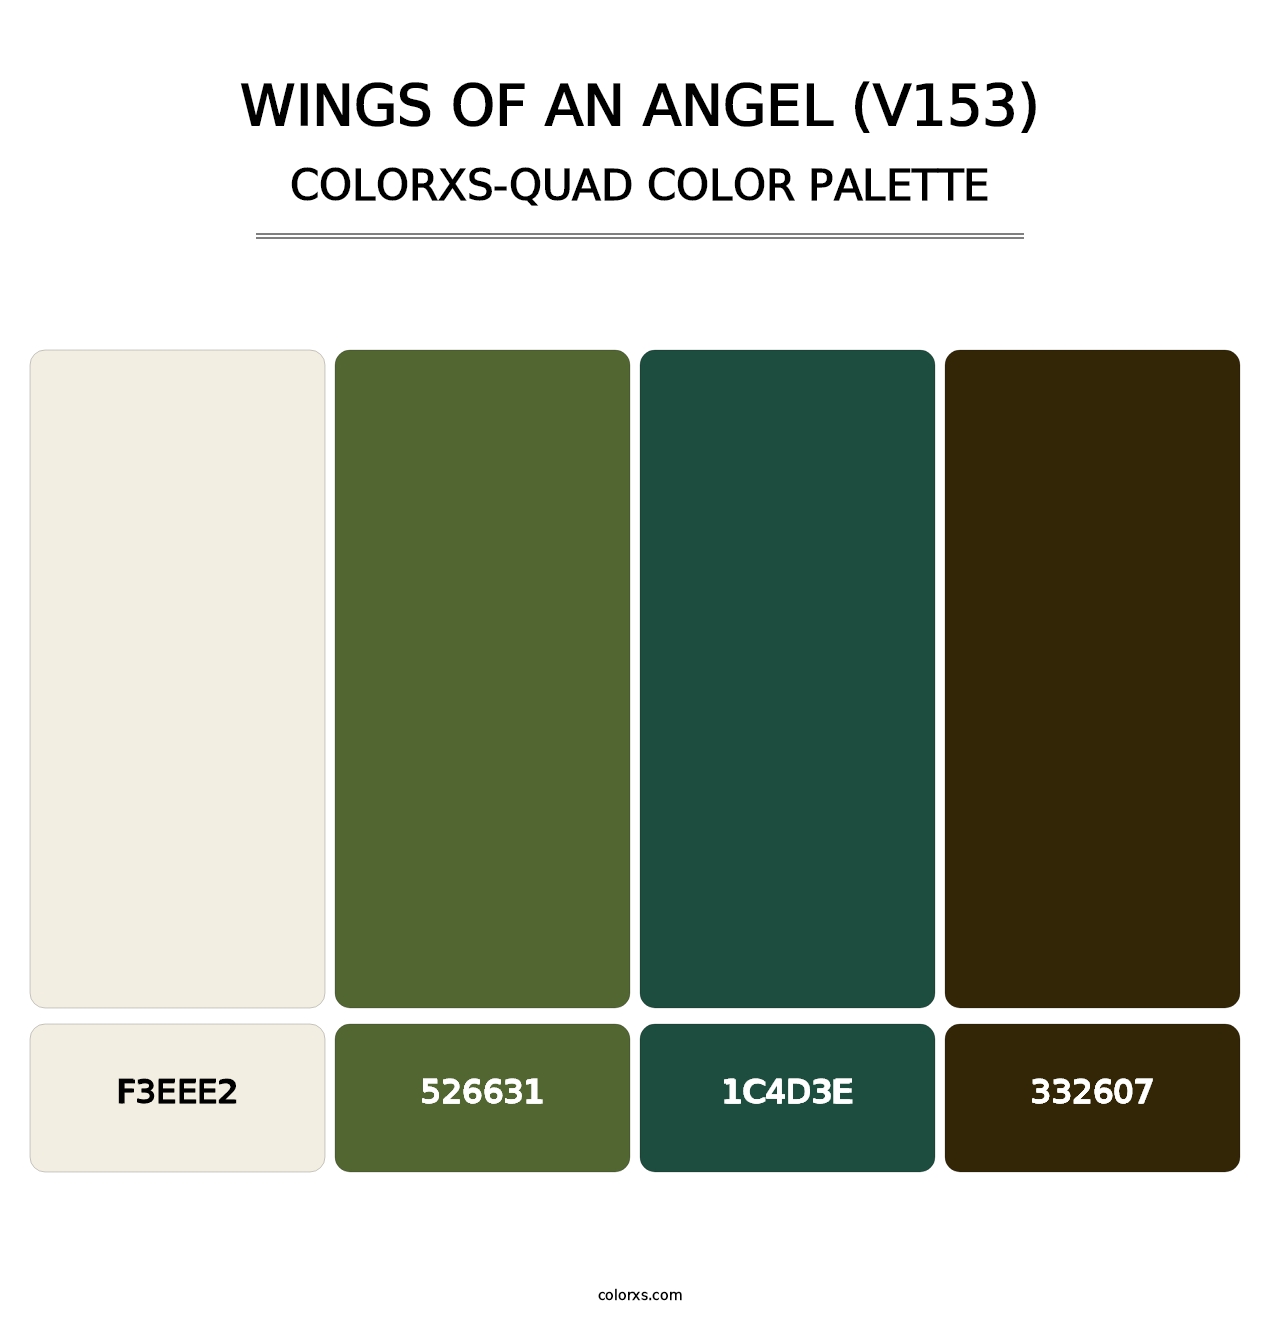 Wings of an Angel (V153) - Colorxs Quad Palette